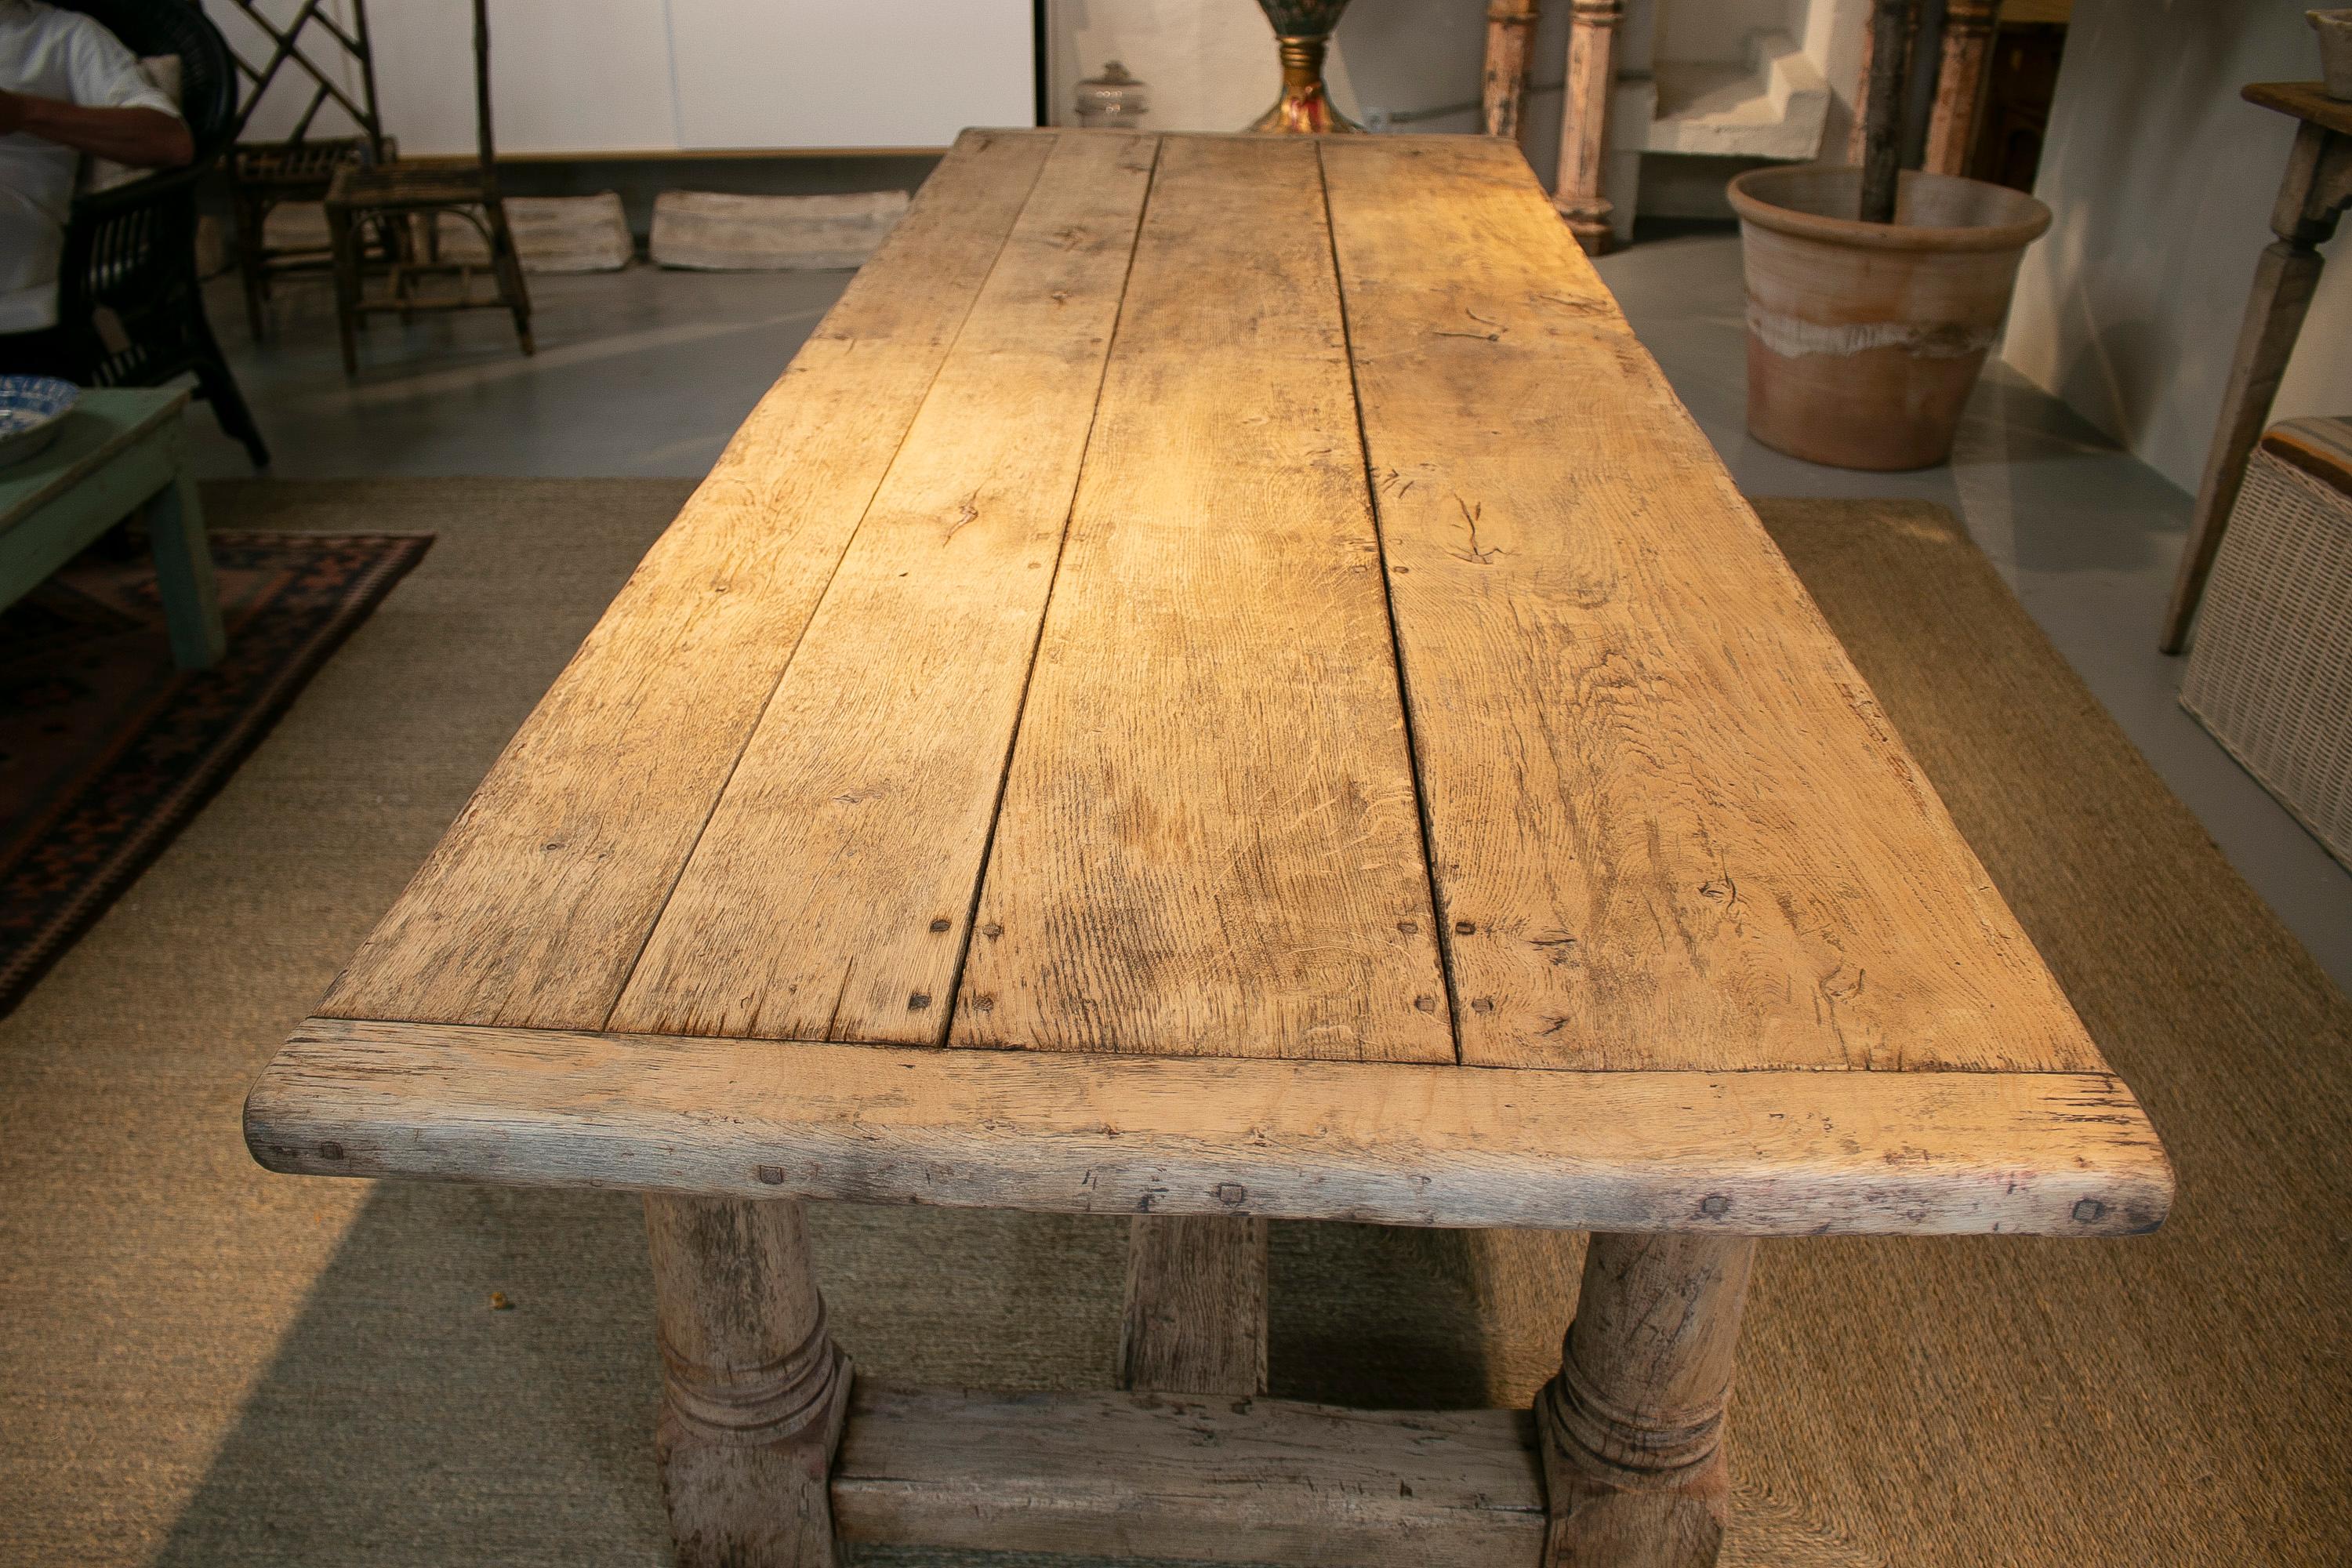 19th Century English Lime Washed Wood Rustic Dinning Table with Crossbeam Legs 2